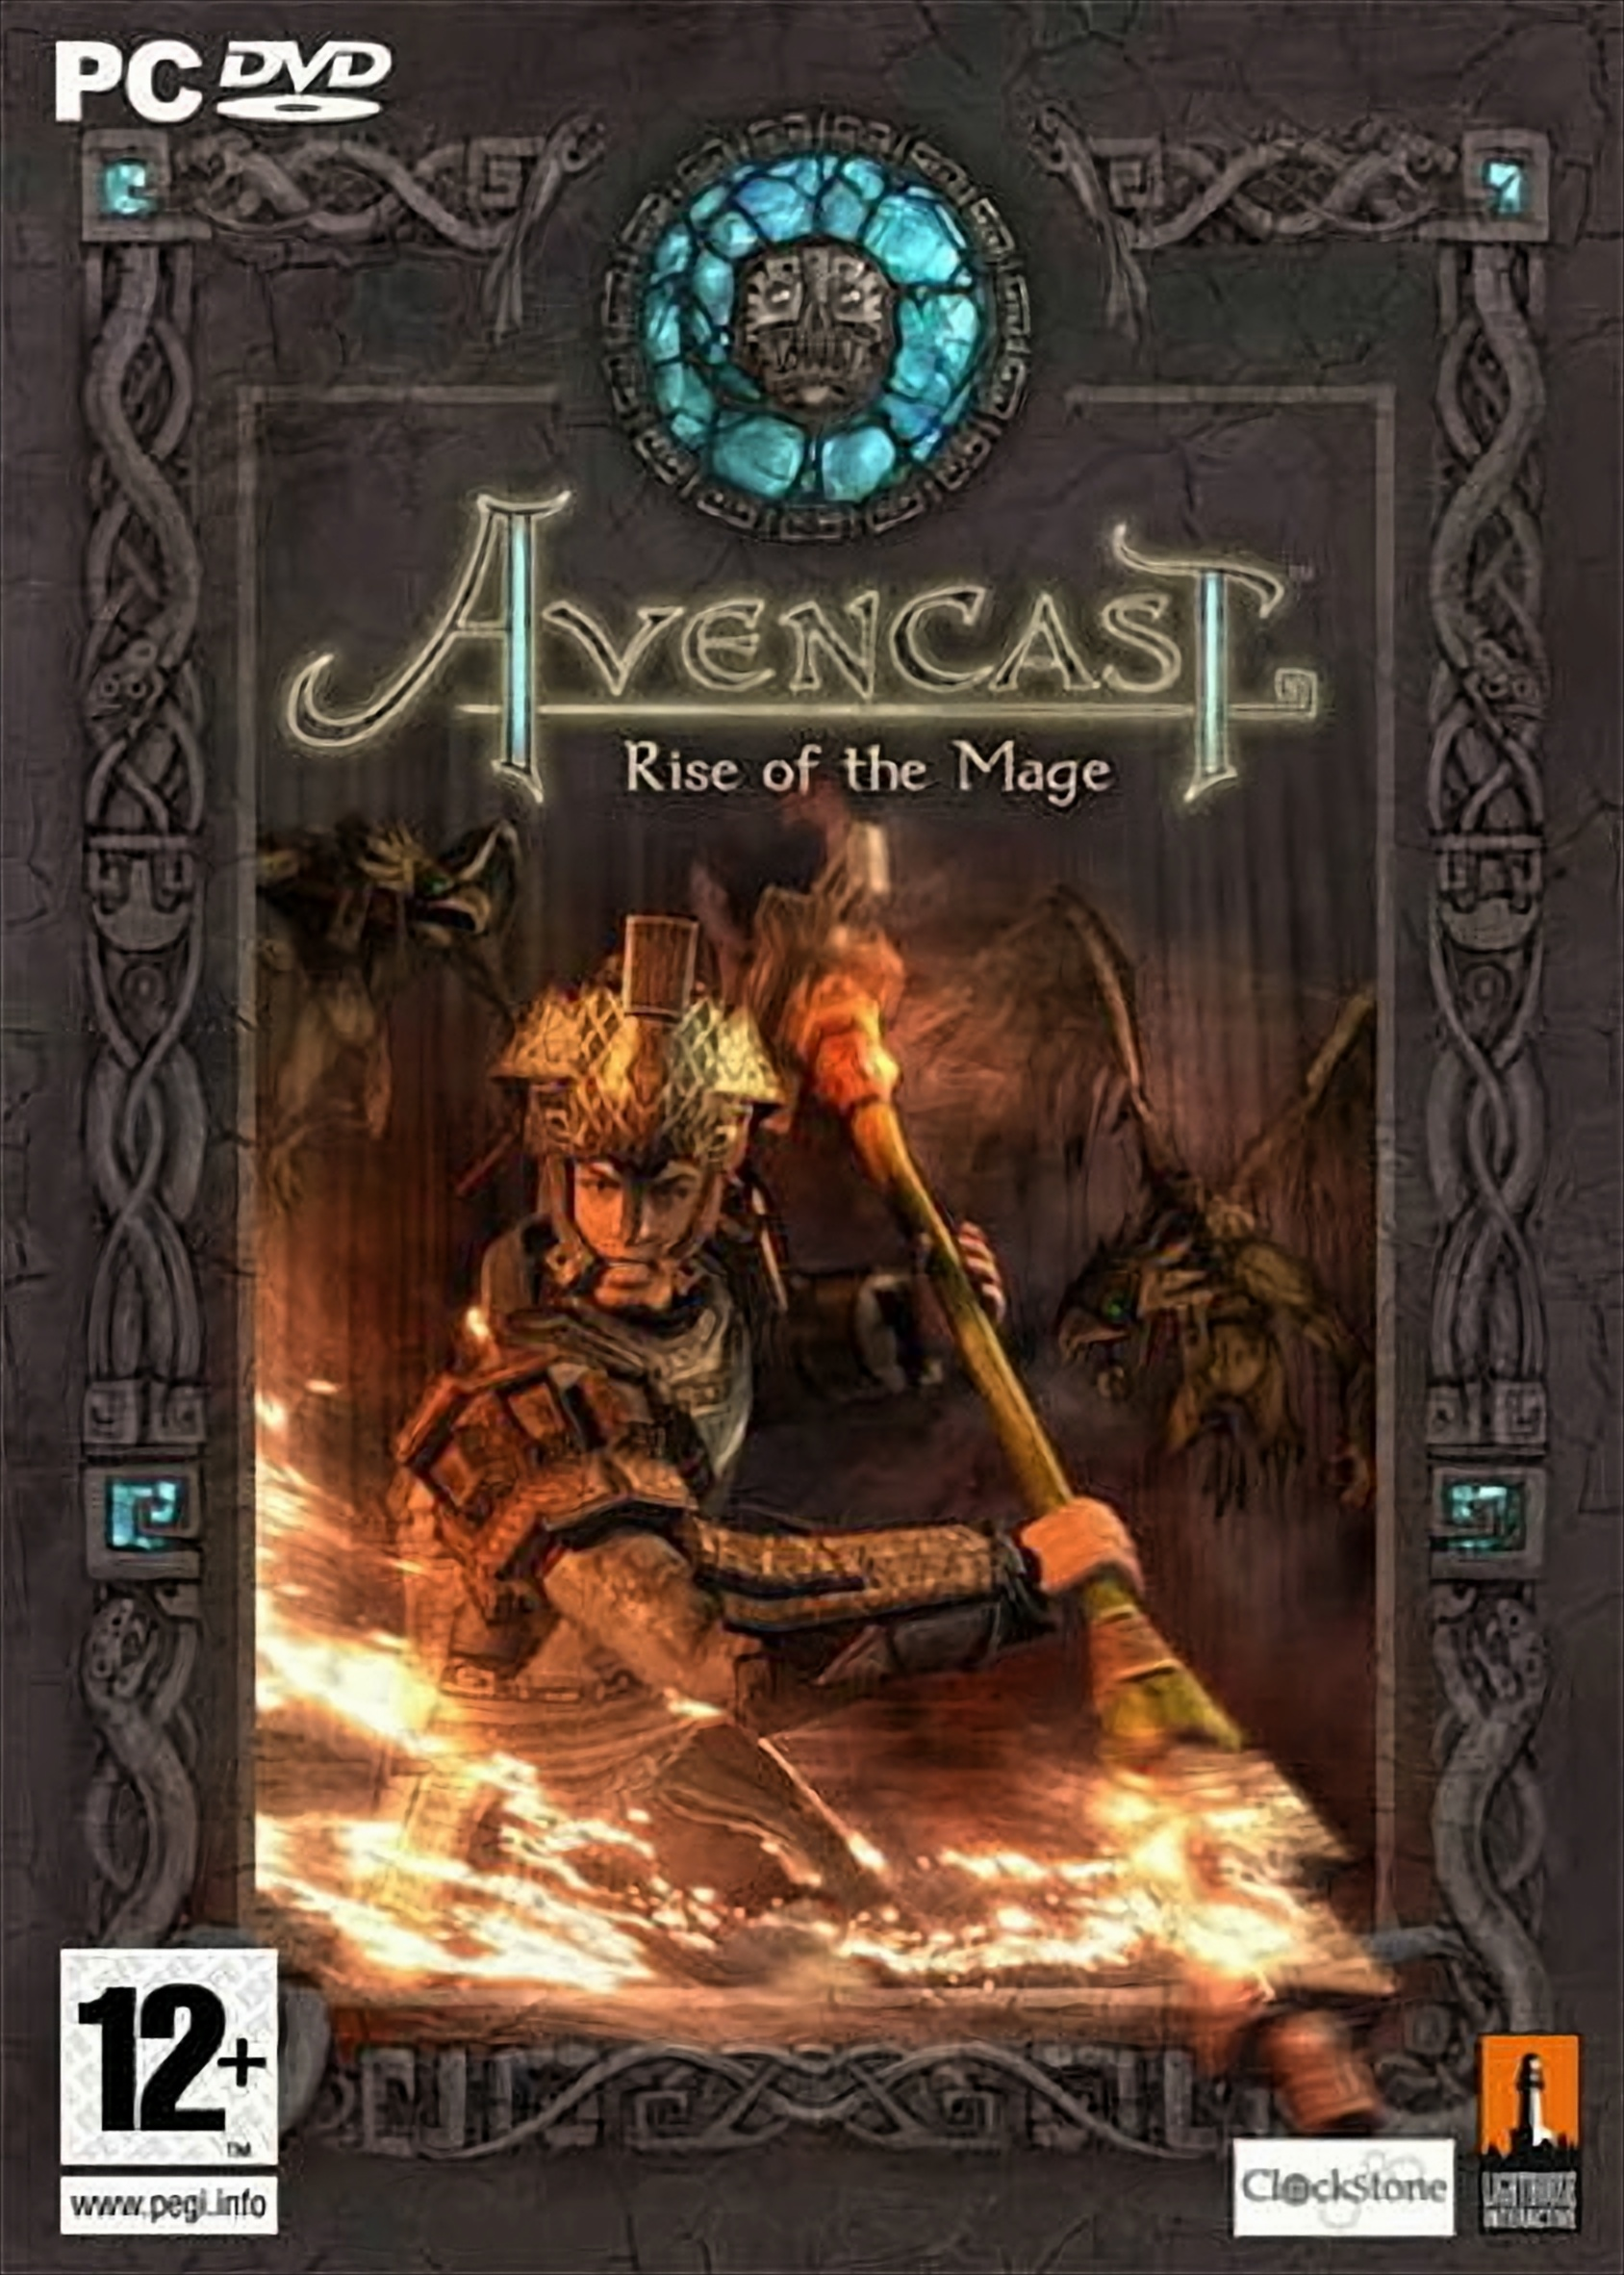 The Mage - [PC] Avencast Of Rise -